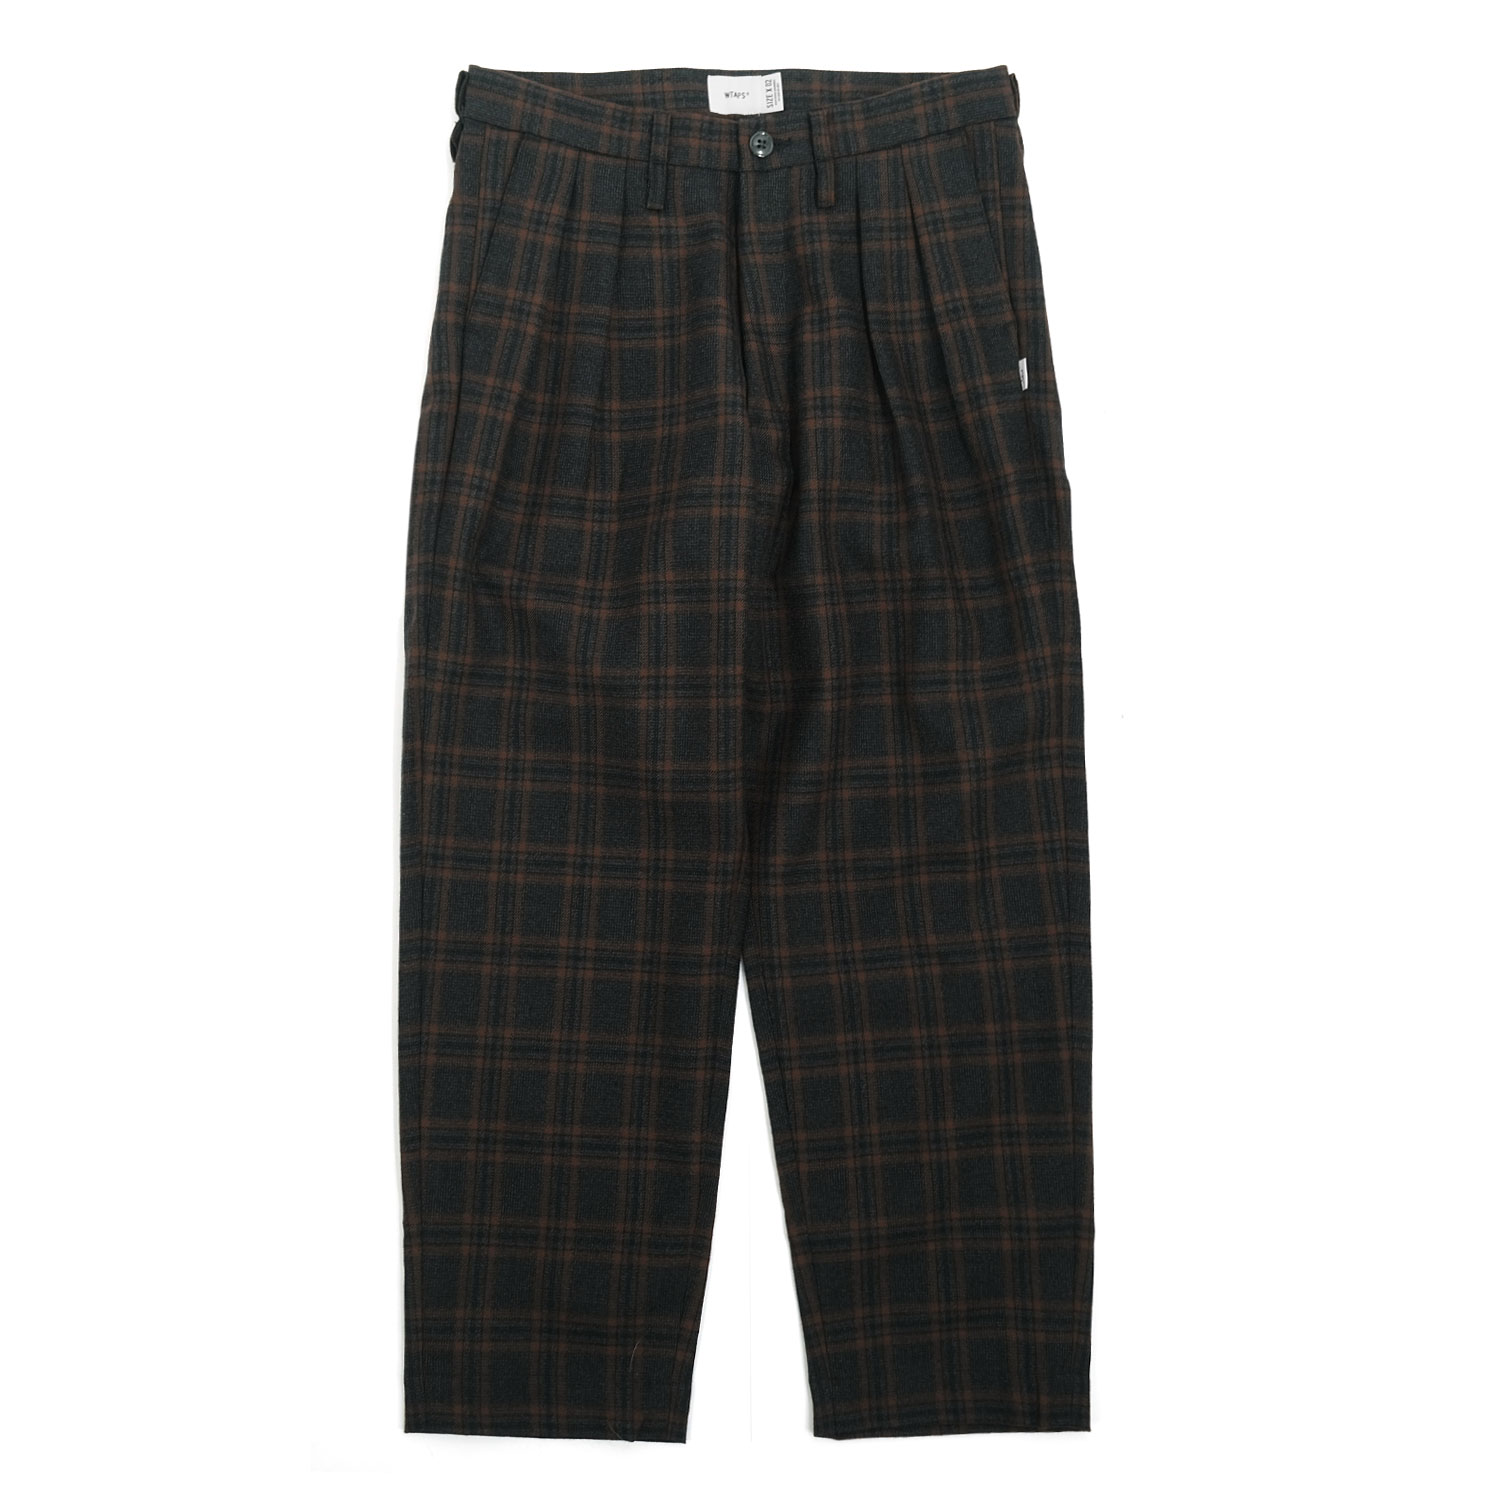 21aw wtaps TUCK 02 / TROUSERS / COTTON. | iins.org